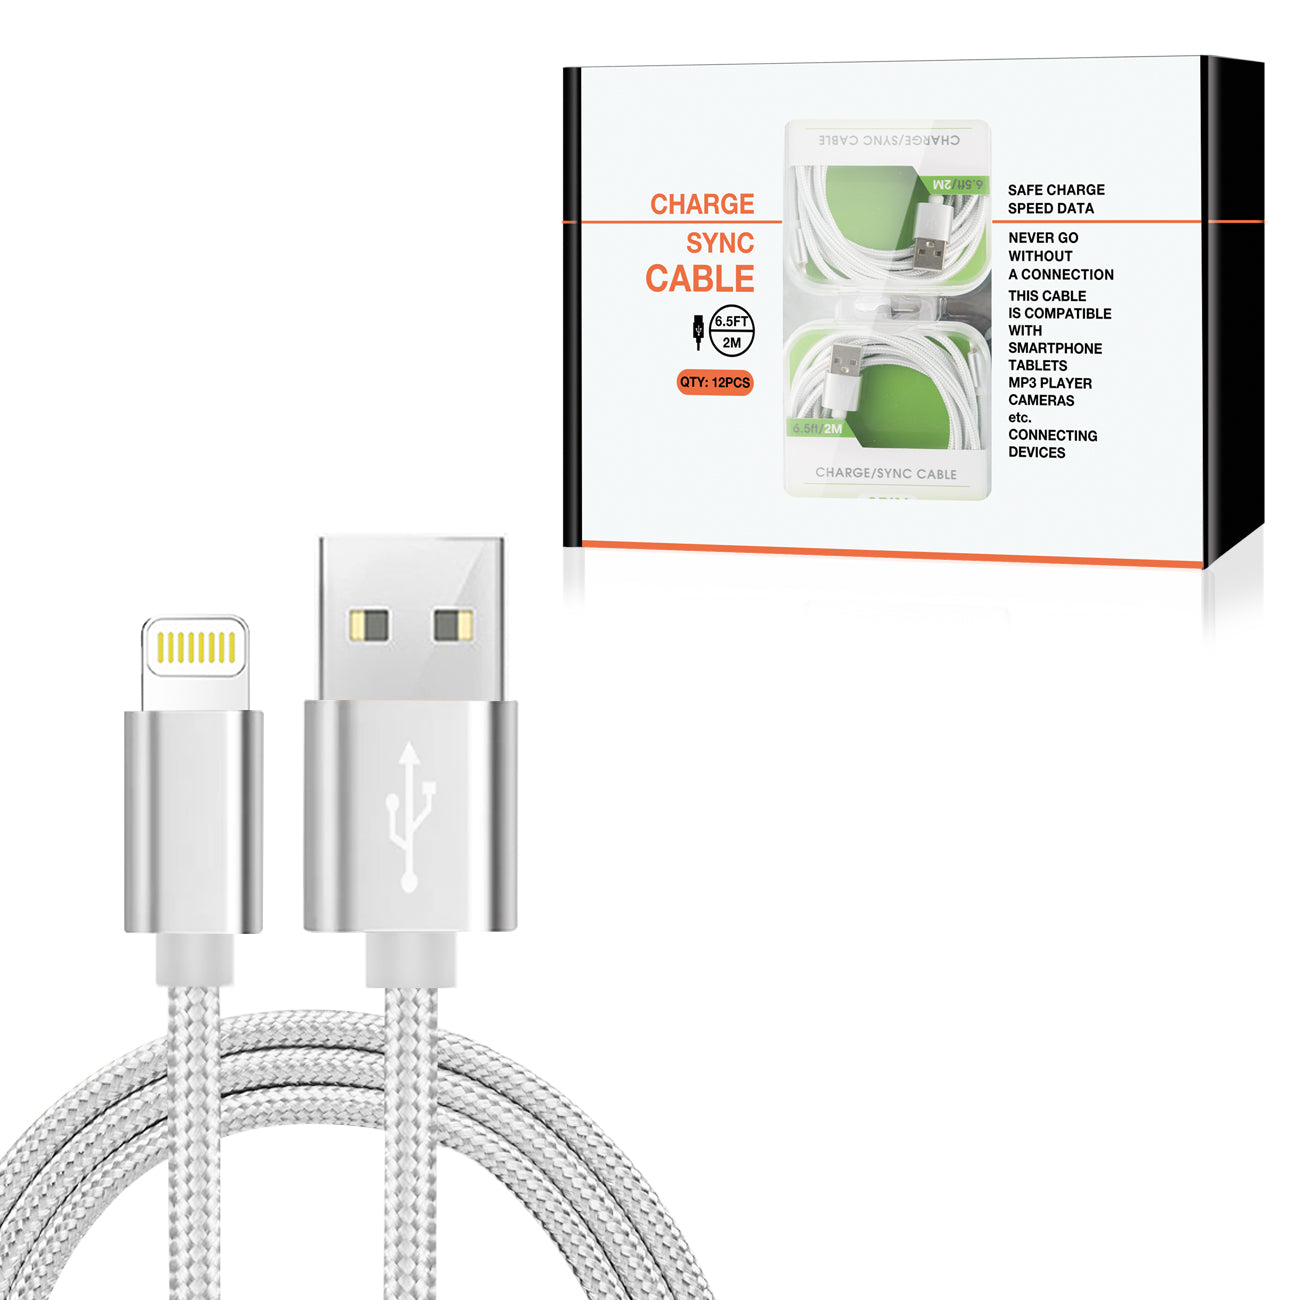 8-PIN Fast Charge/Sync Cable 6.5 ft In Silver (12pcs)